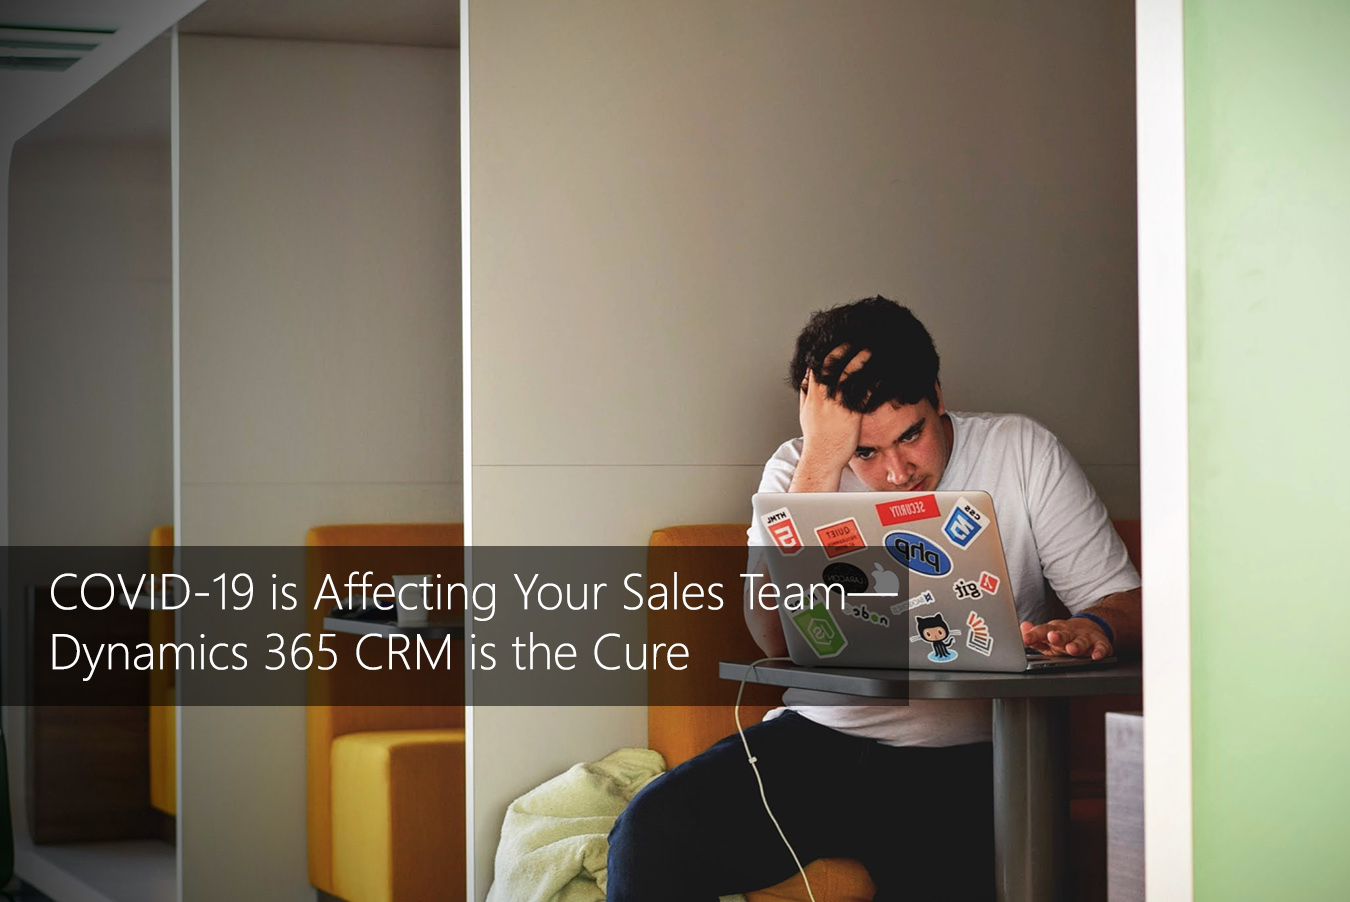 tmc-blog-covid-19-is-affecting-your-sales-team-dynamics-365-crm-is-the-cure 1